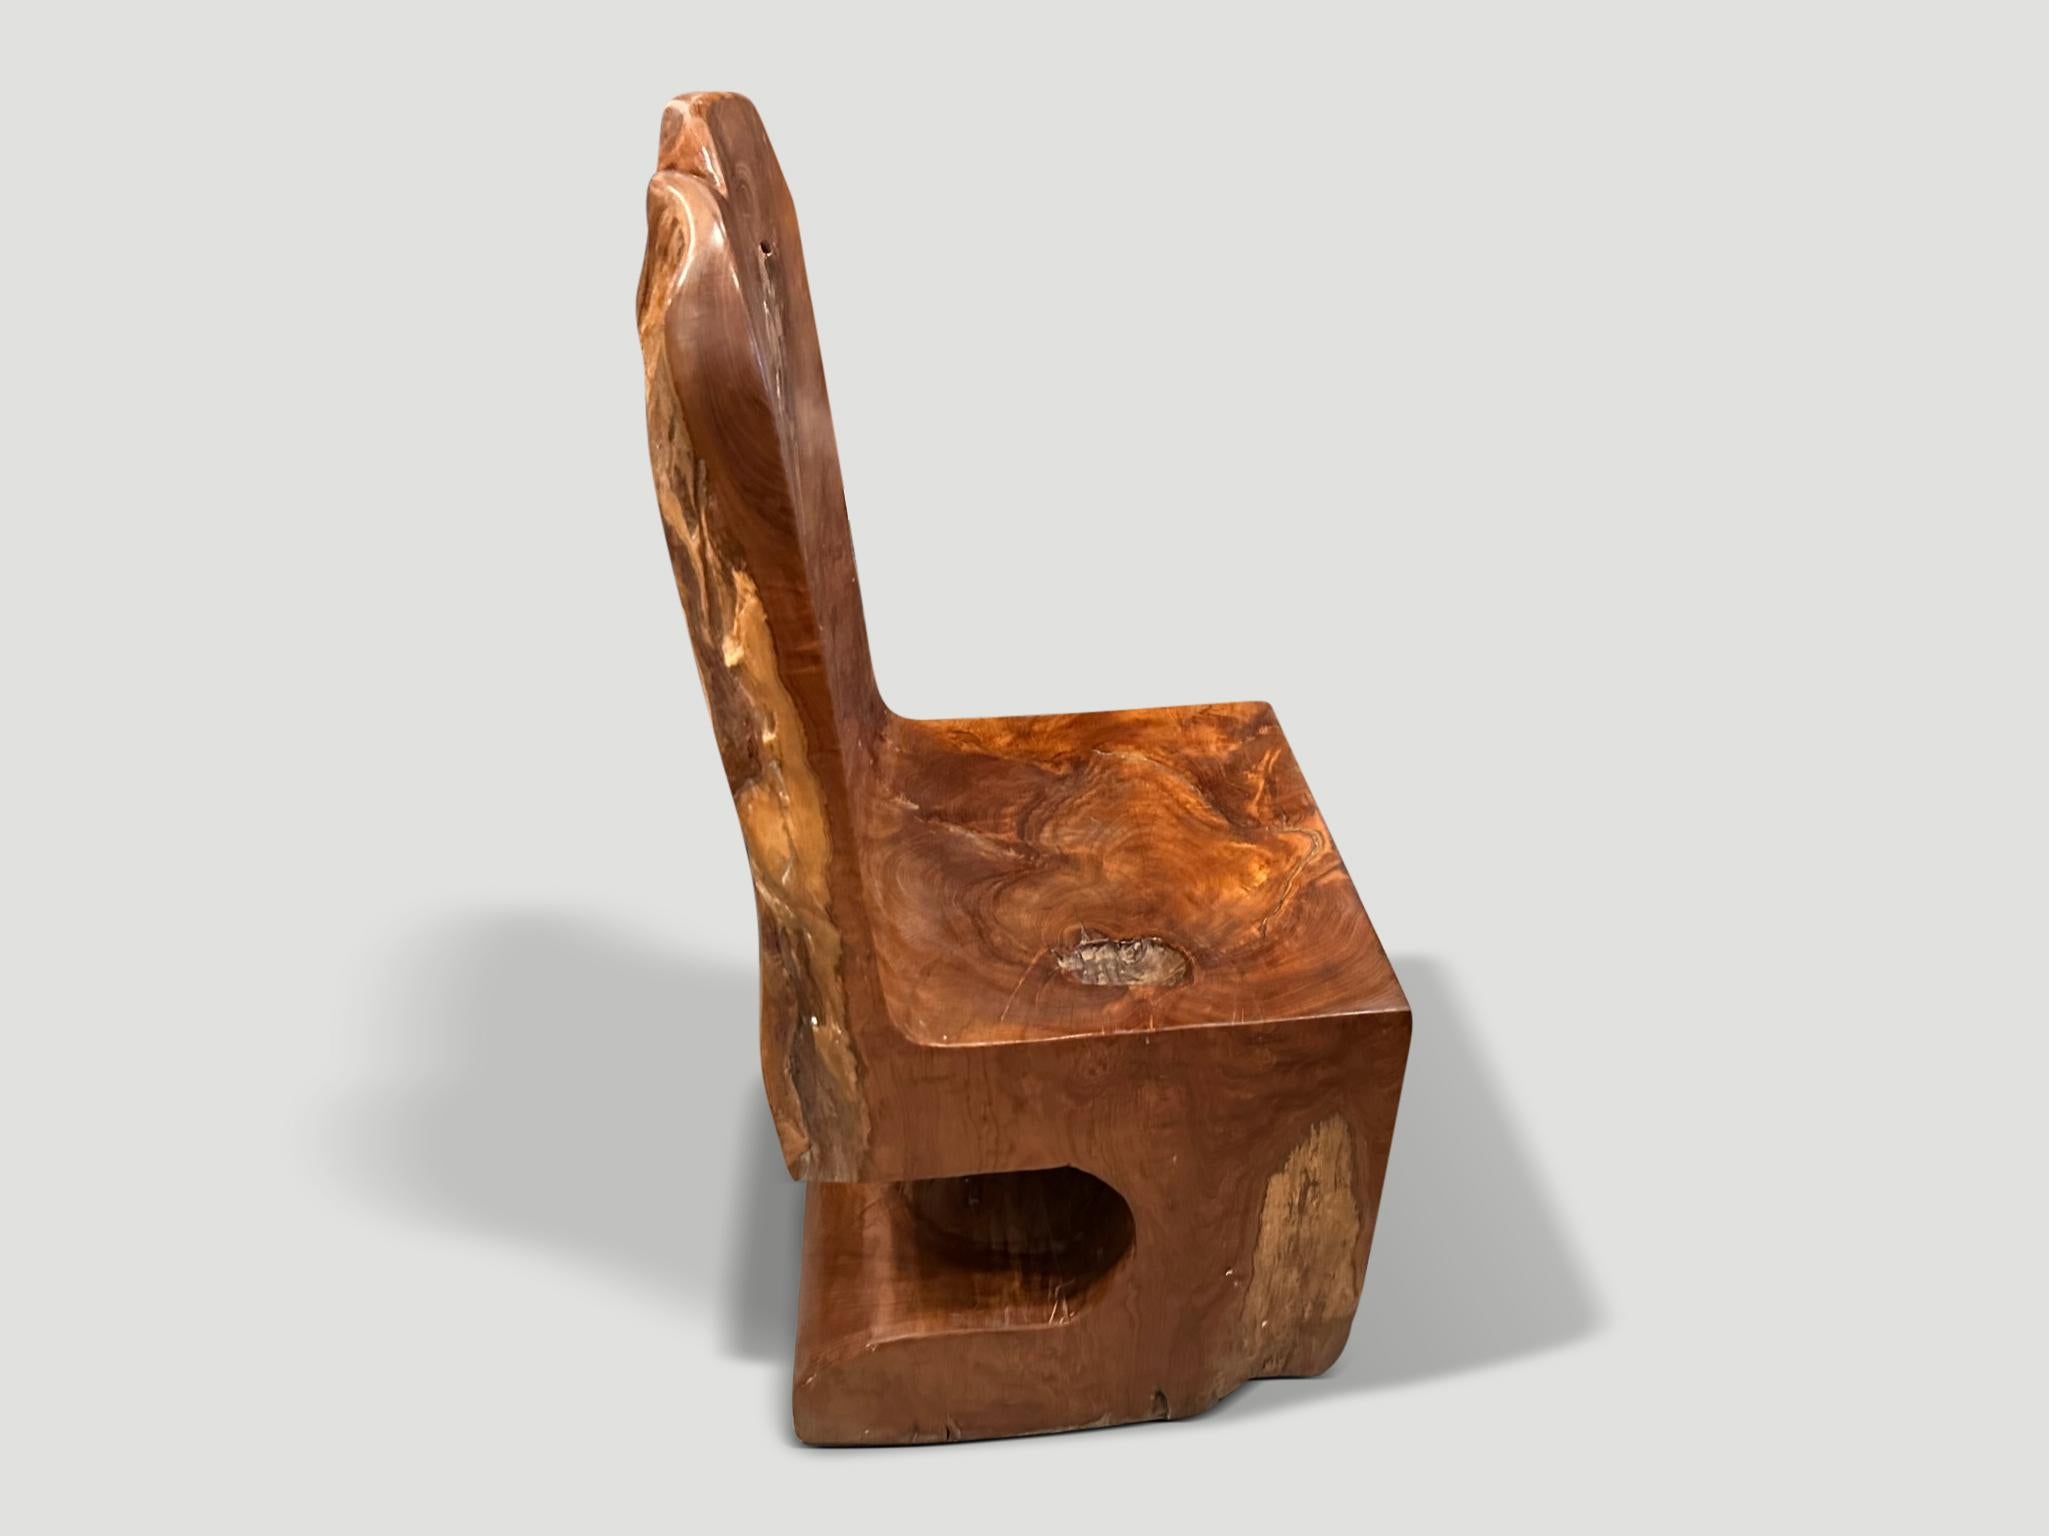 Andrianna Shamaris Sculptural Teak Wood Chair In Excellent Condition For Sale In New York, NY